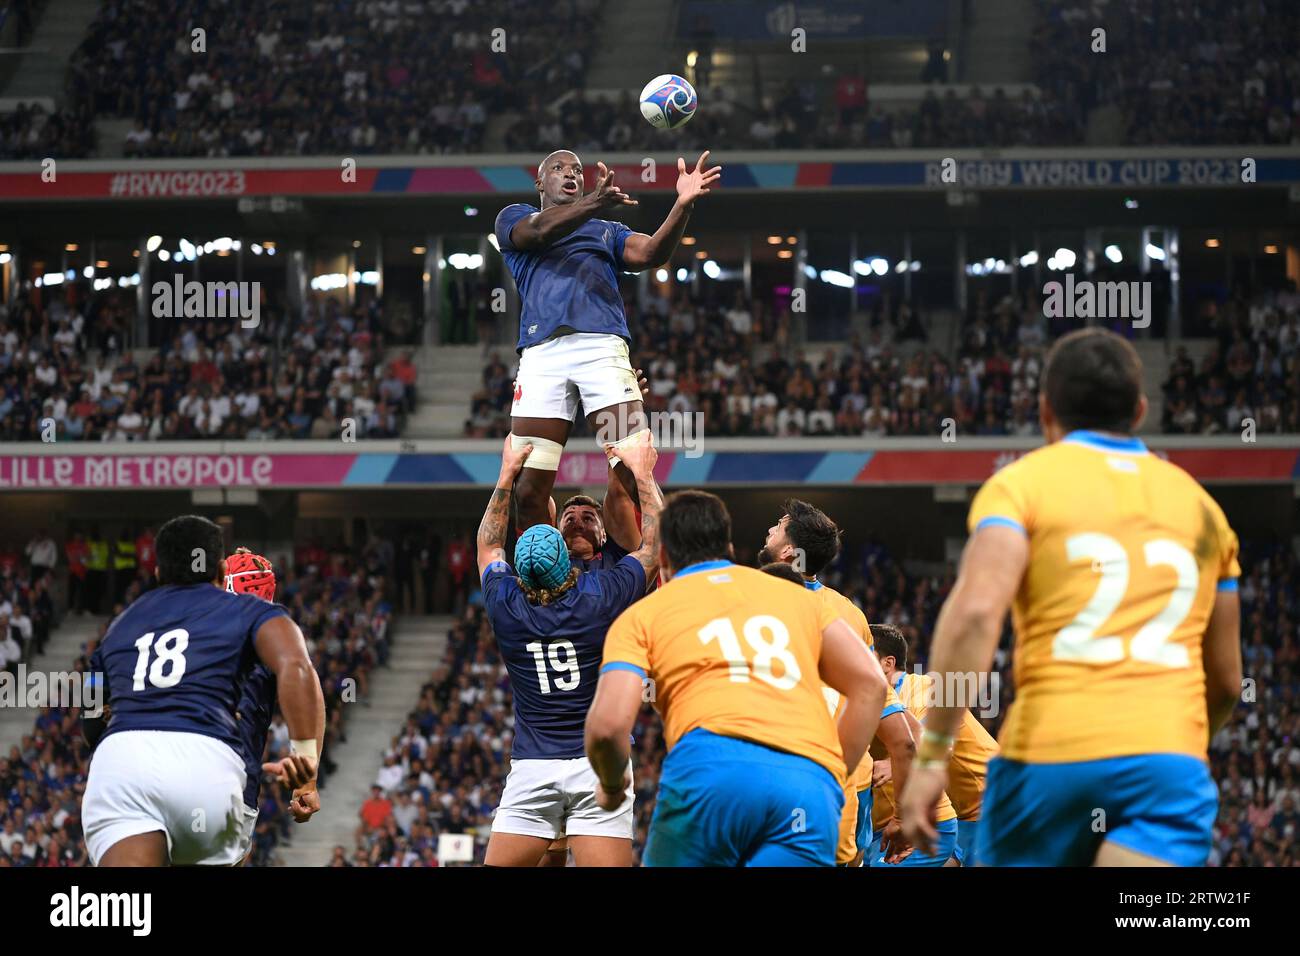 Lille, France. 14th Sep, 2023. Julien Mattia/Le Pictorium - France-Uruguay Rugby World Cup match - 14/09/2023 - France/Hauts de France/Lille - during the Rugby World Cup 2023 match between France and Uruguay at Stade Pierre Mauroy, Lille, on September 14, 2023. Credit: LE PICTORIUM/Alamy Live News Stock Photo